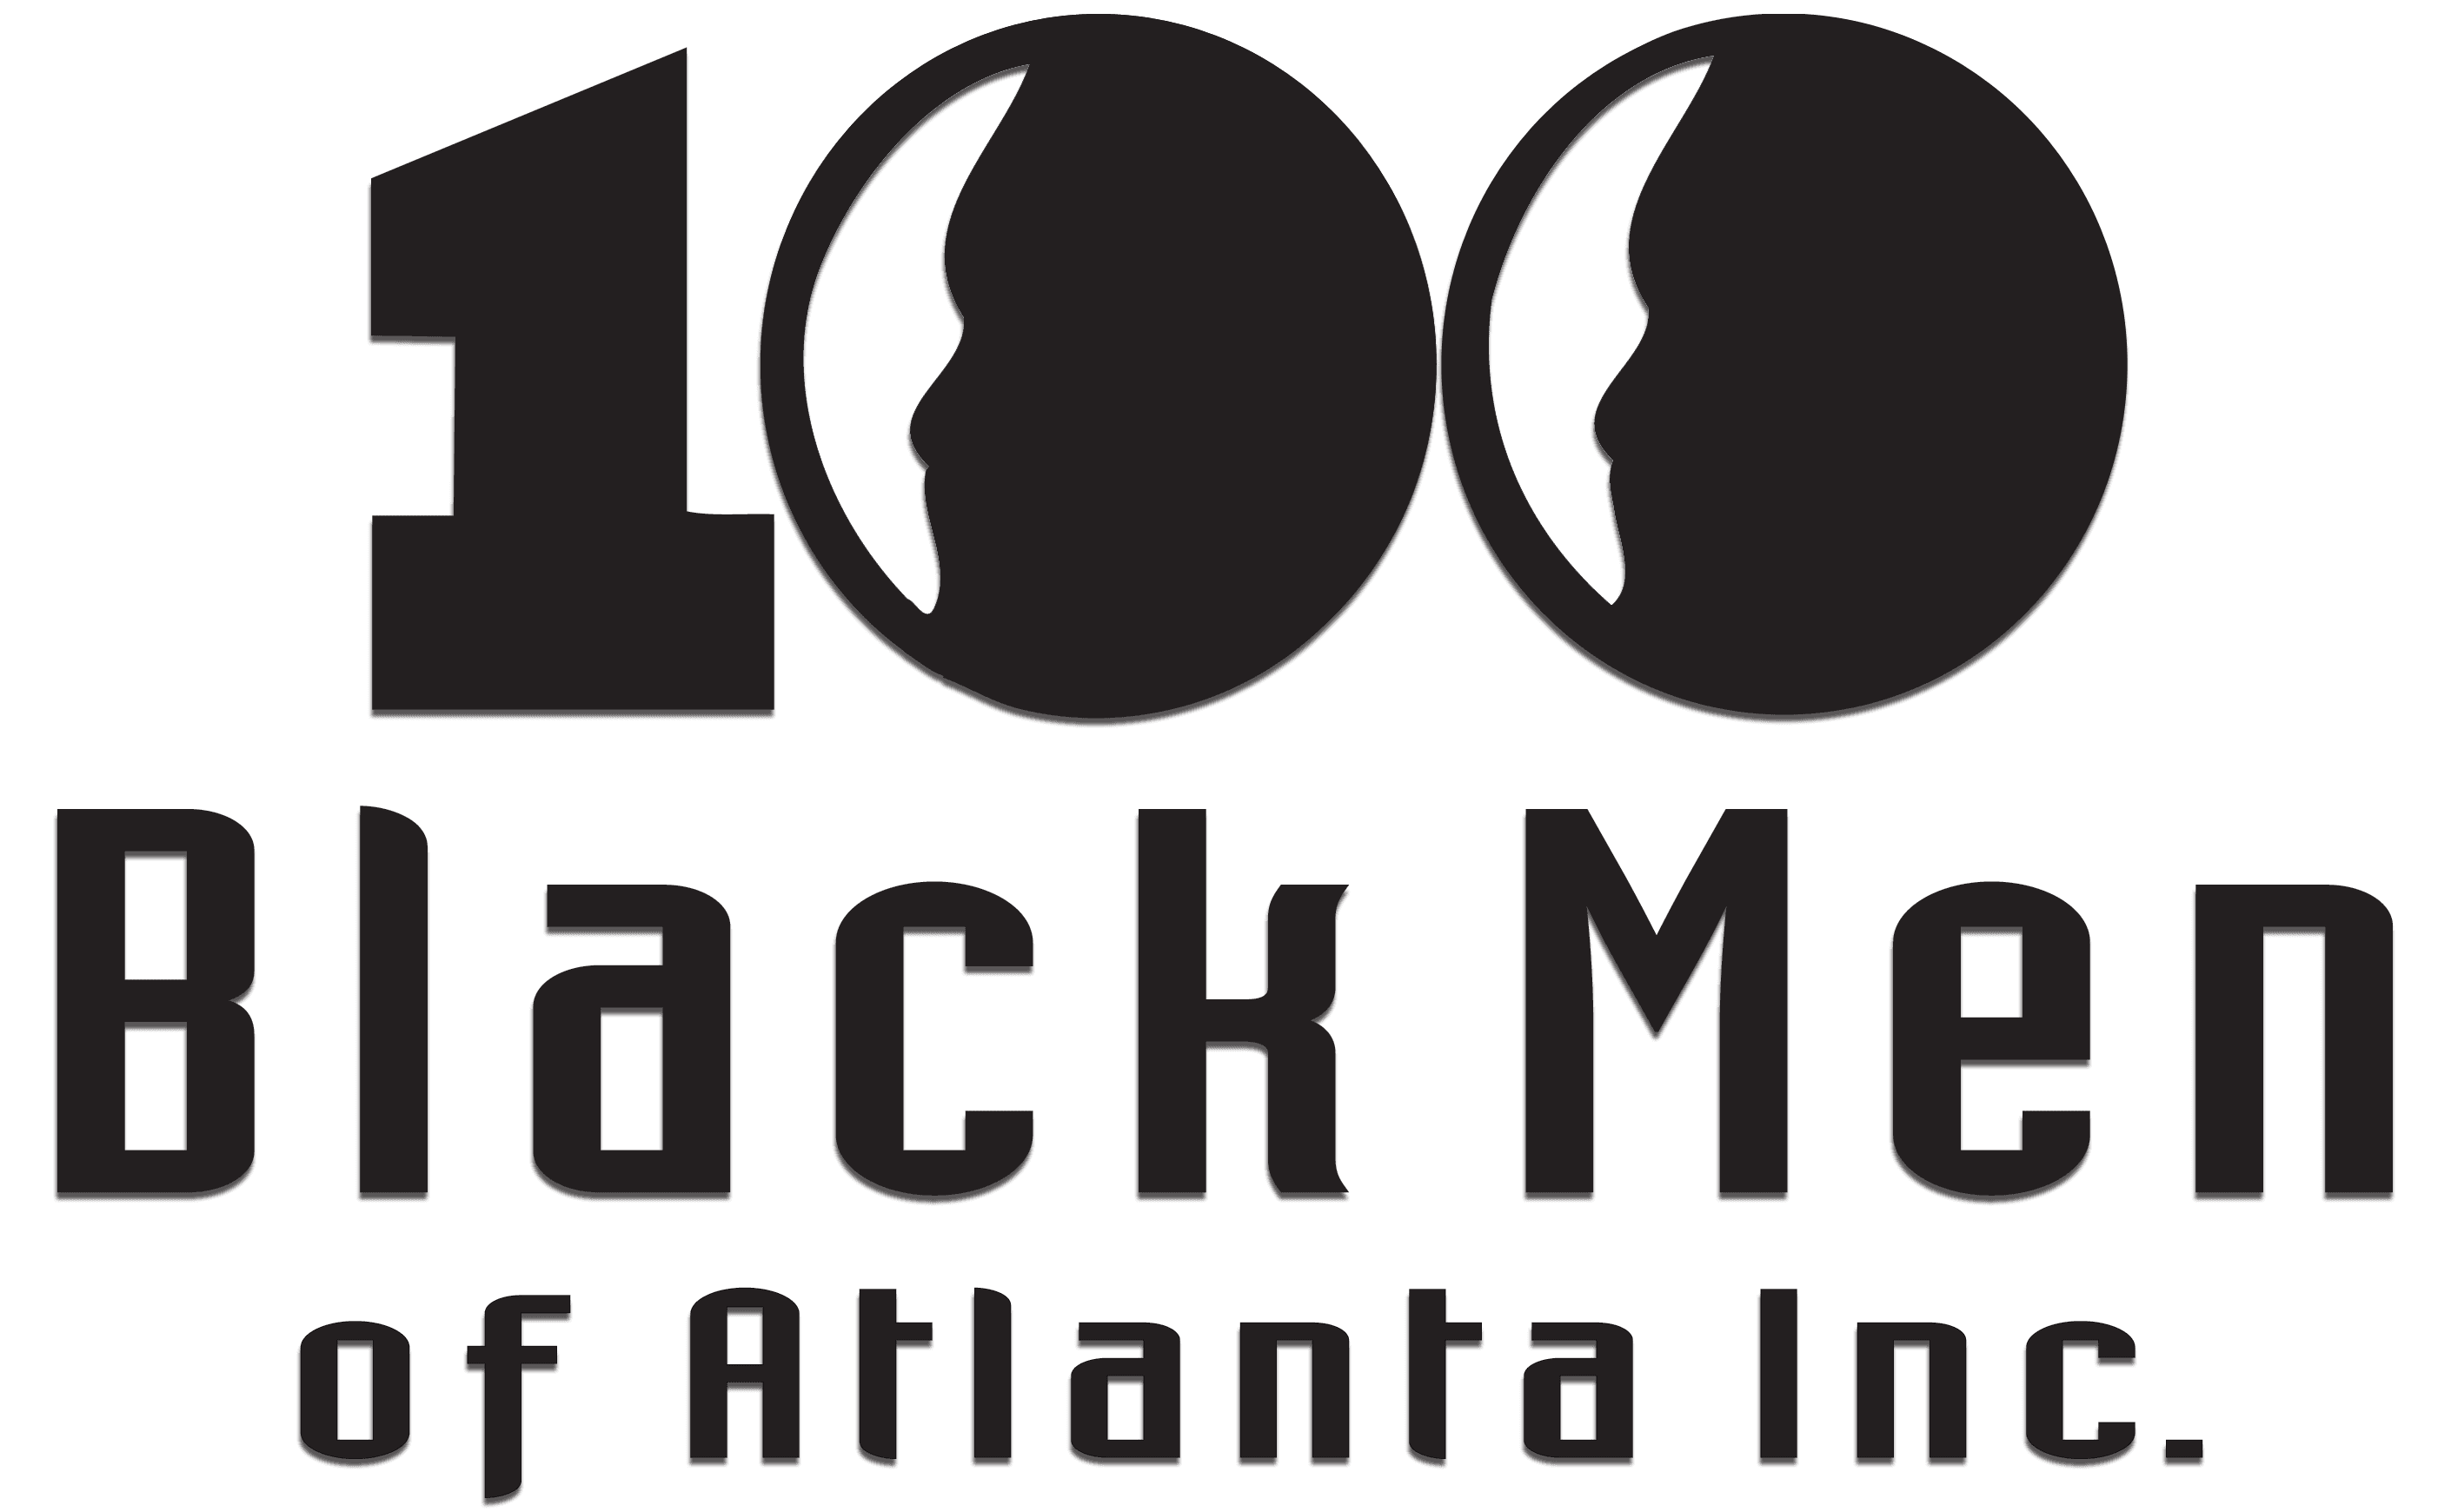 100 Black Men of Atlanta Launches ‘Brother to Brother’ Series Season 1